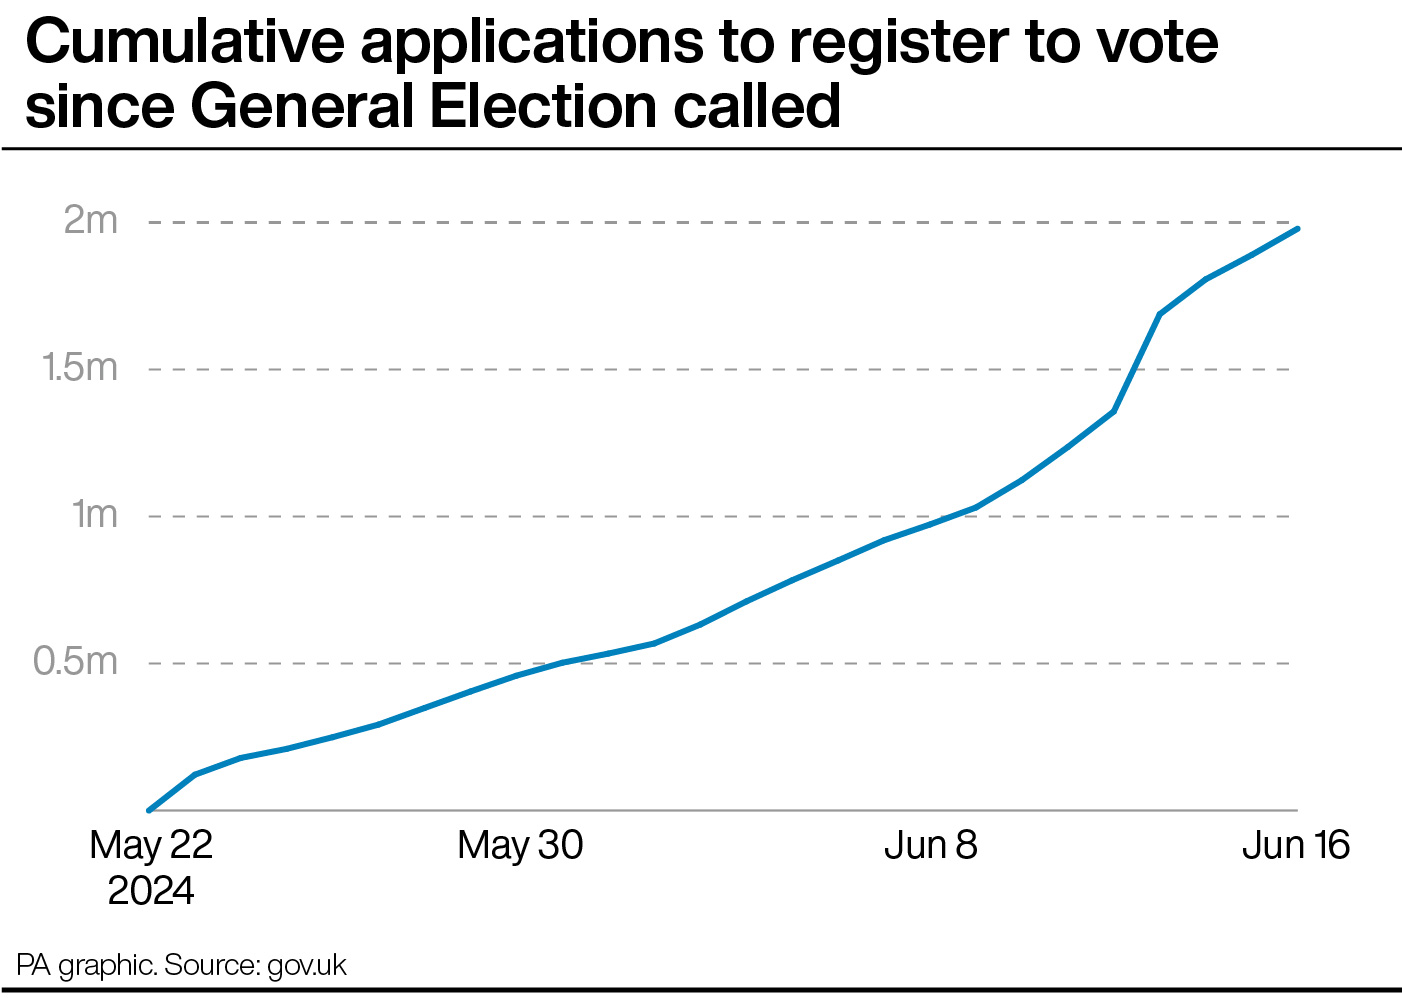 A graph showing cumulative applications to register to vote since the General Election was called